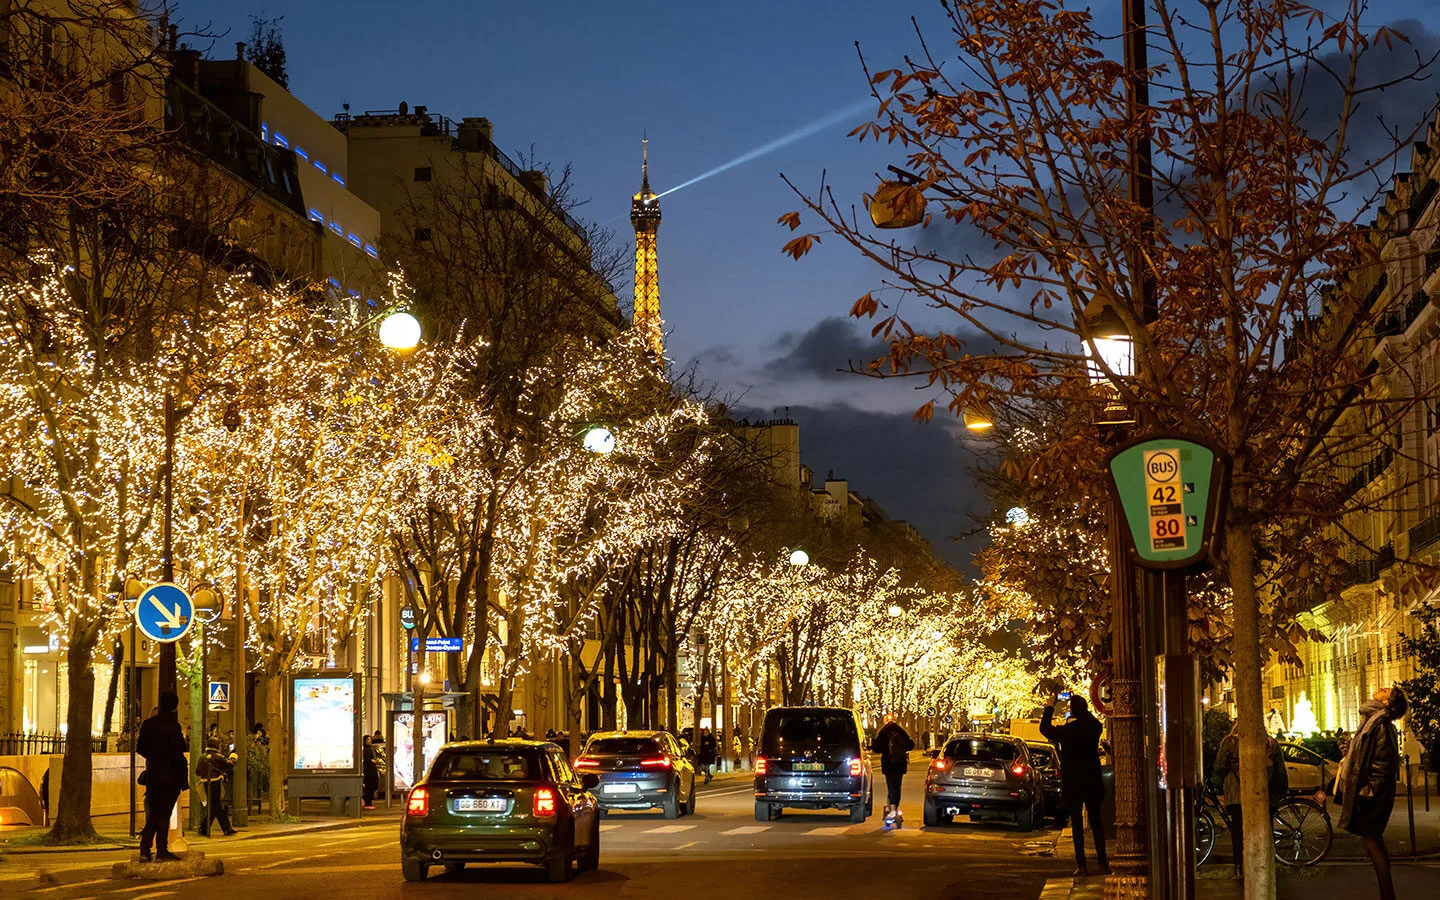 Paris at Christmas – views of the Eiffel Tower from the Champs Elysees